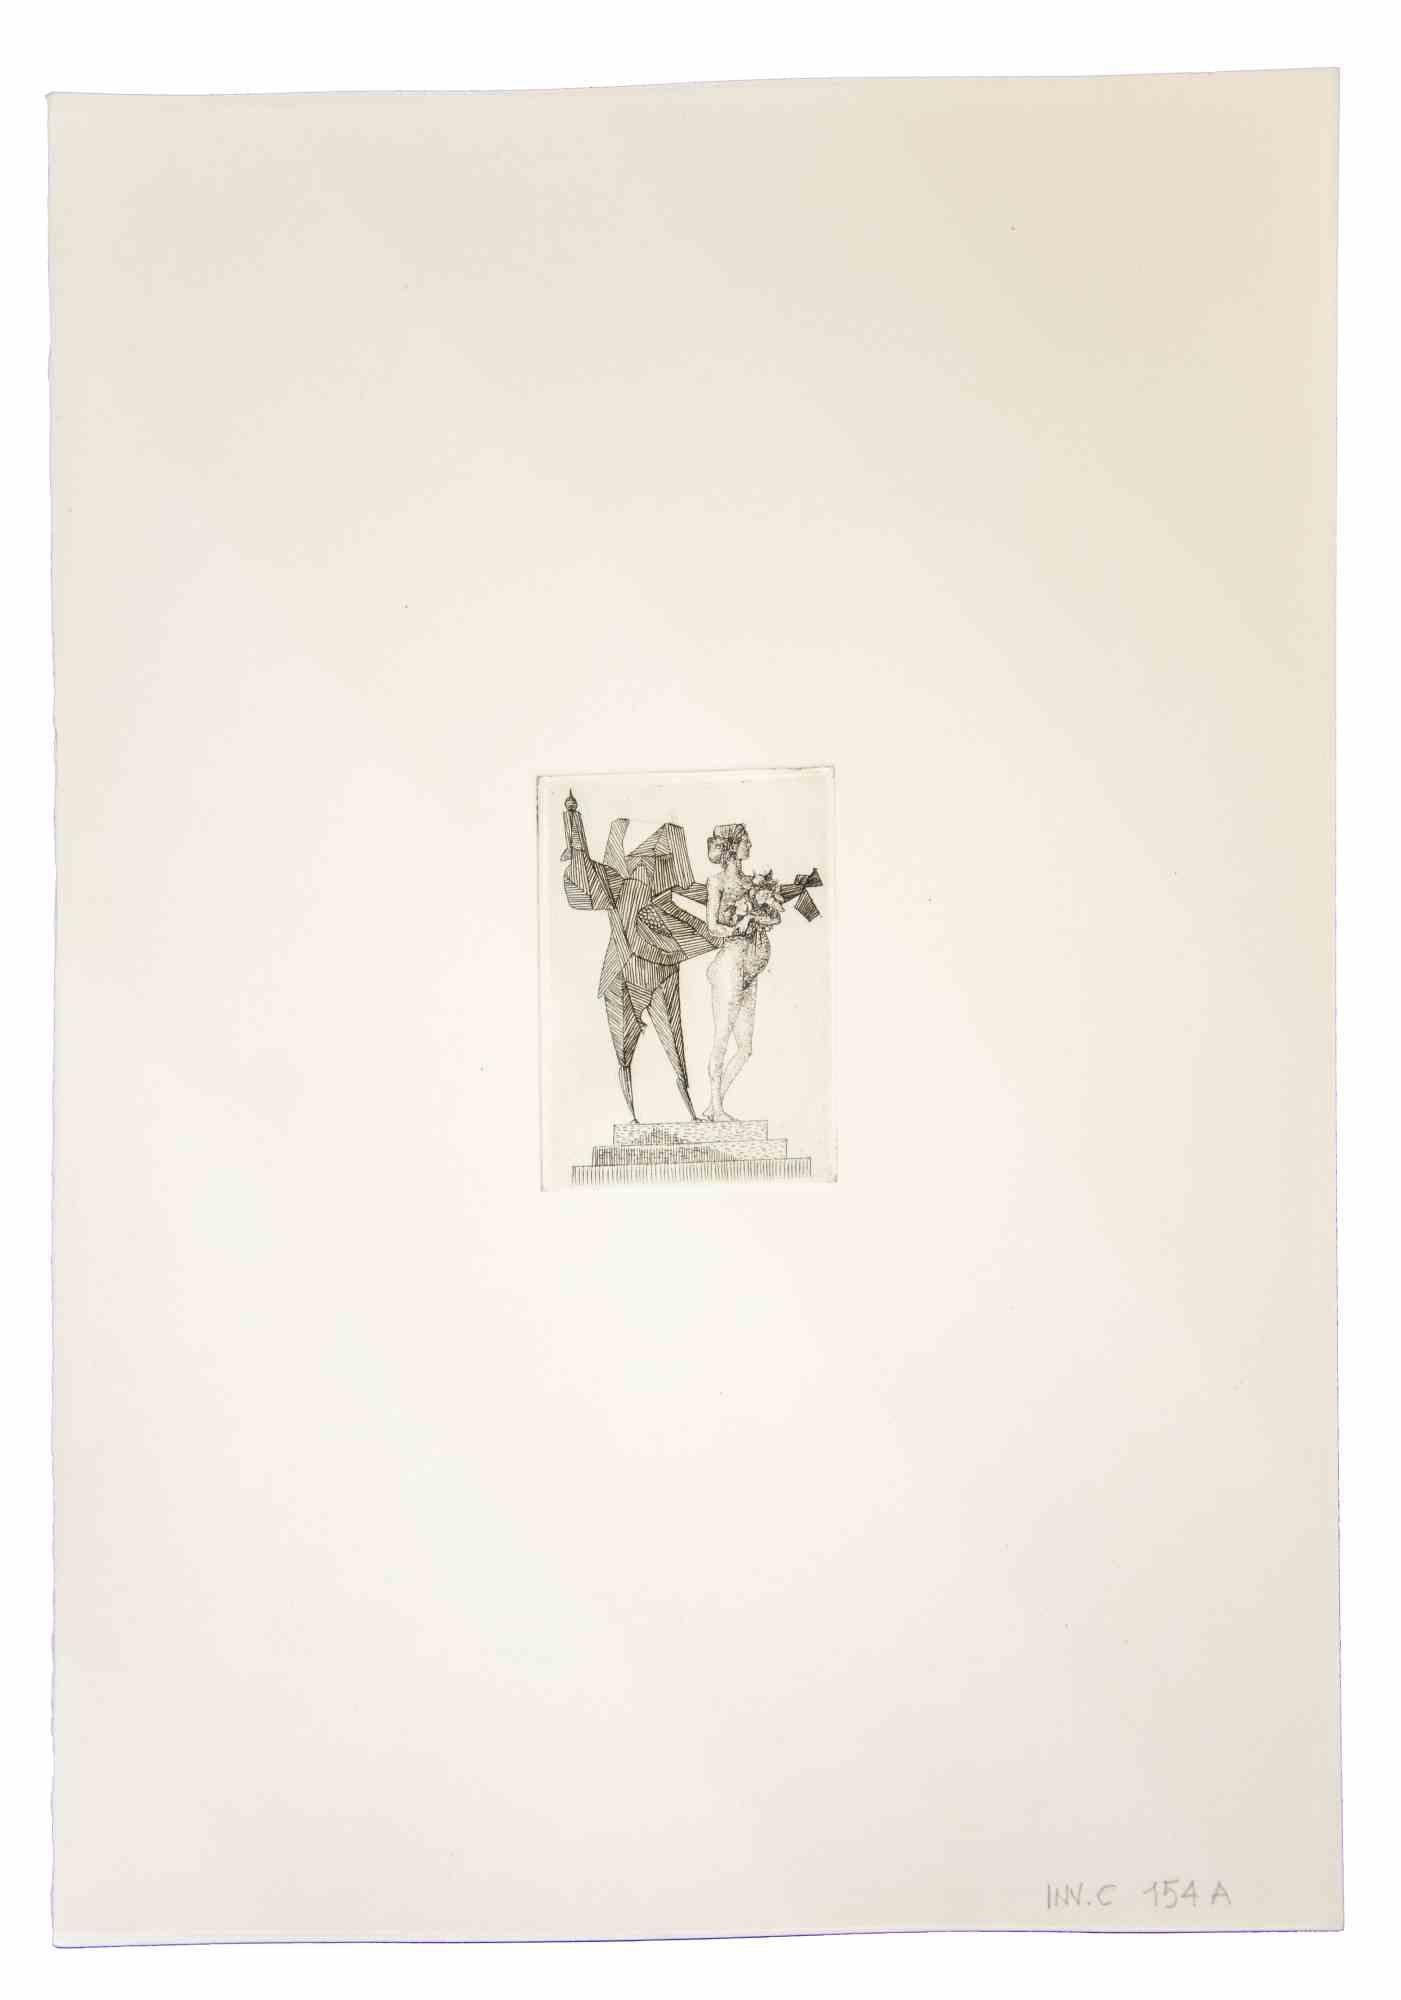 Venus and the Sapient is an original etching and drypoint realized by Leo Guida in 1980s.

Mounted on a white cardboard passpartout (50x35 cm).

Not signed.

Leo Guida  (1992 - 2017). Sensitive to current issues, artistic movements and historical